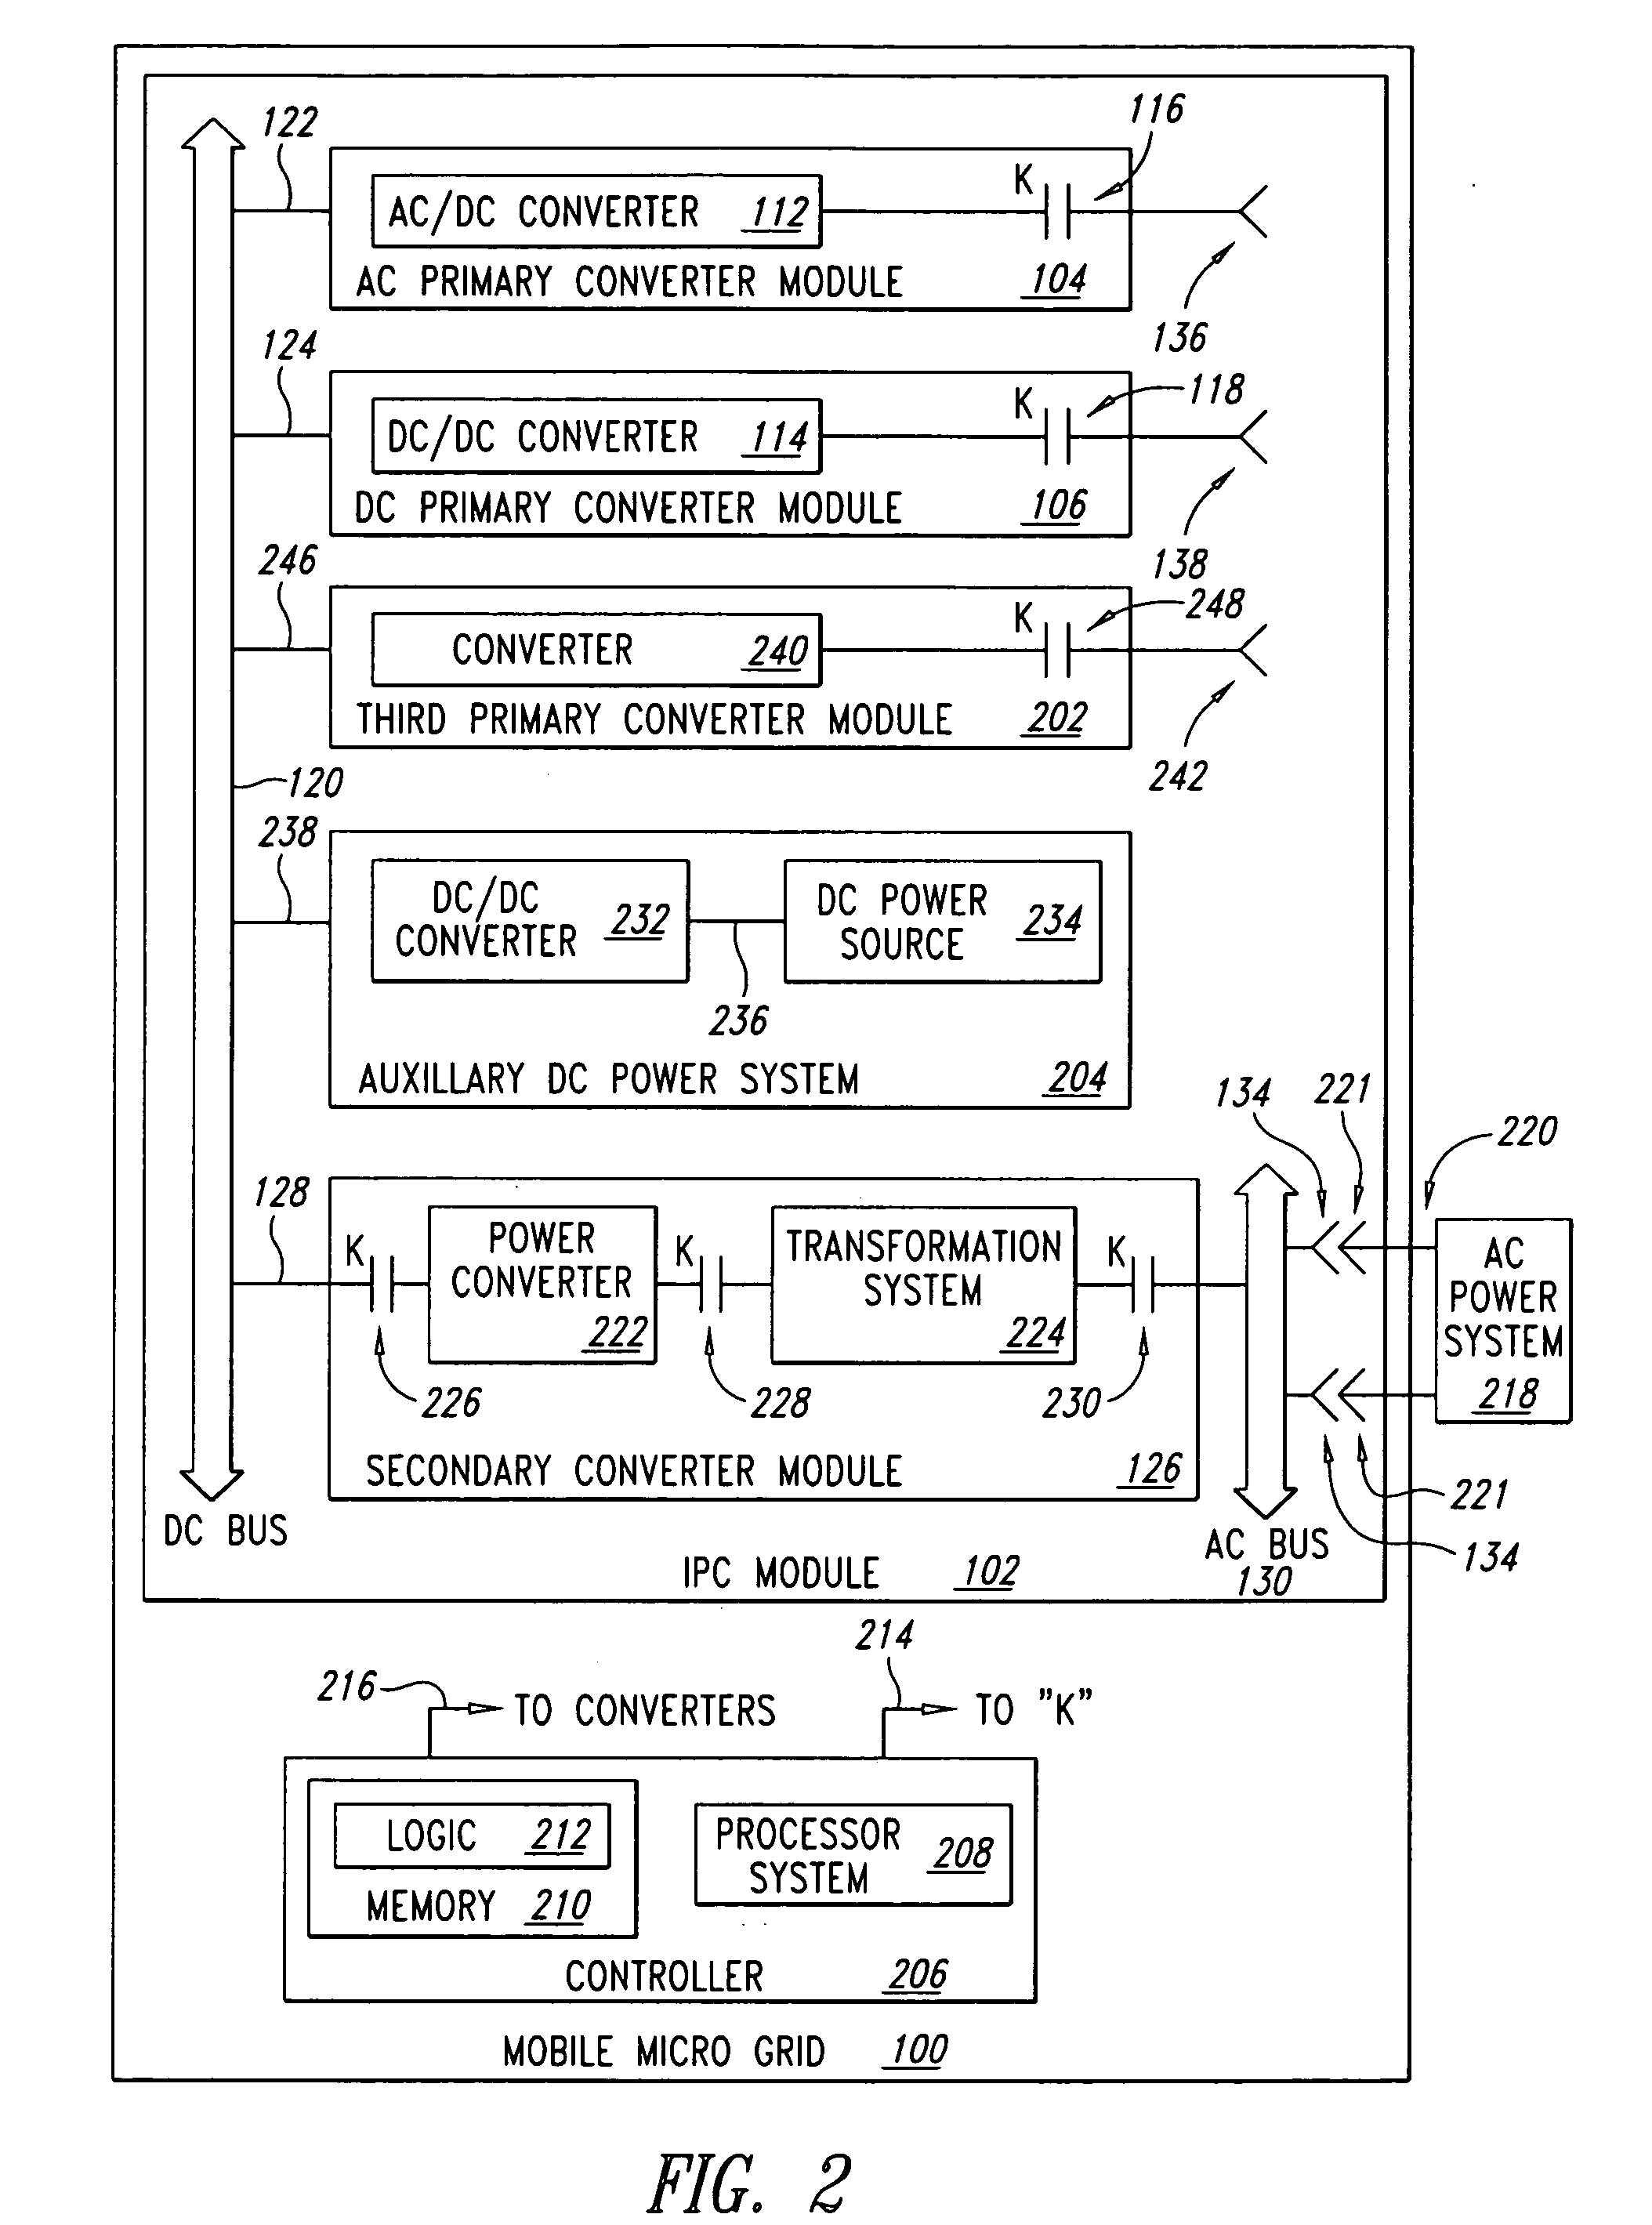 System and method for responding to abrupt load changes on a power system